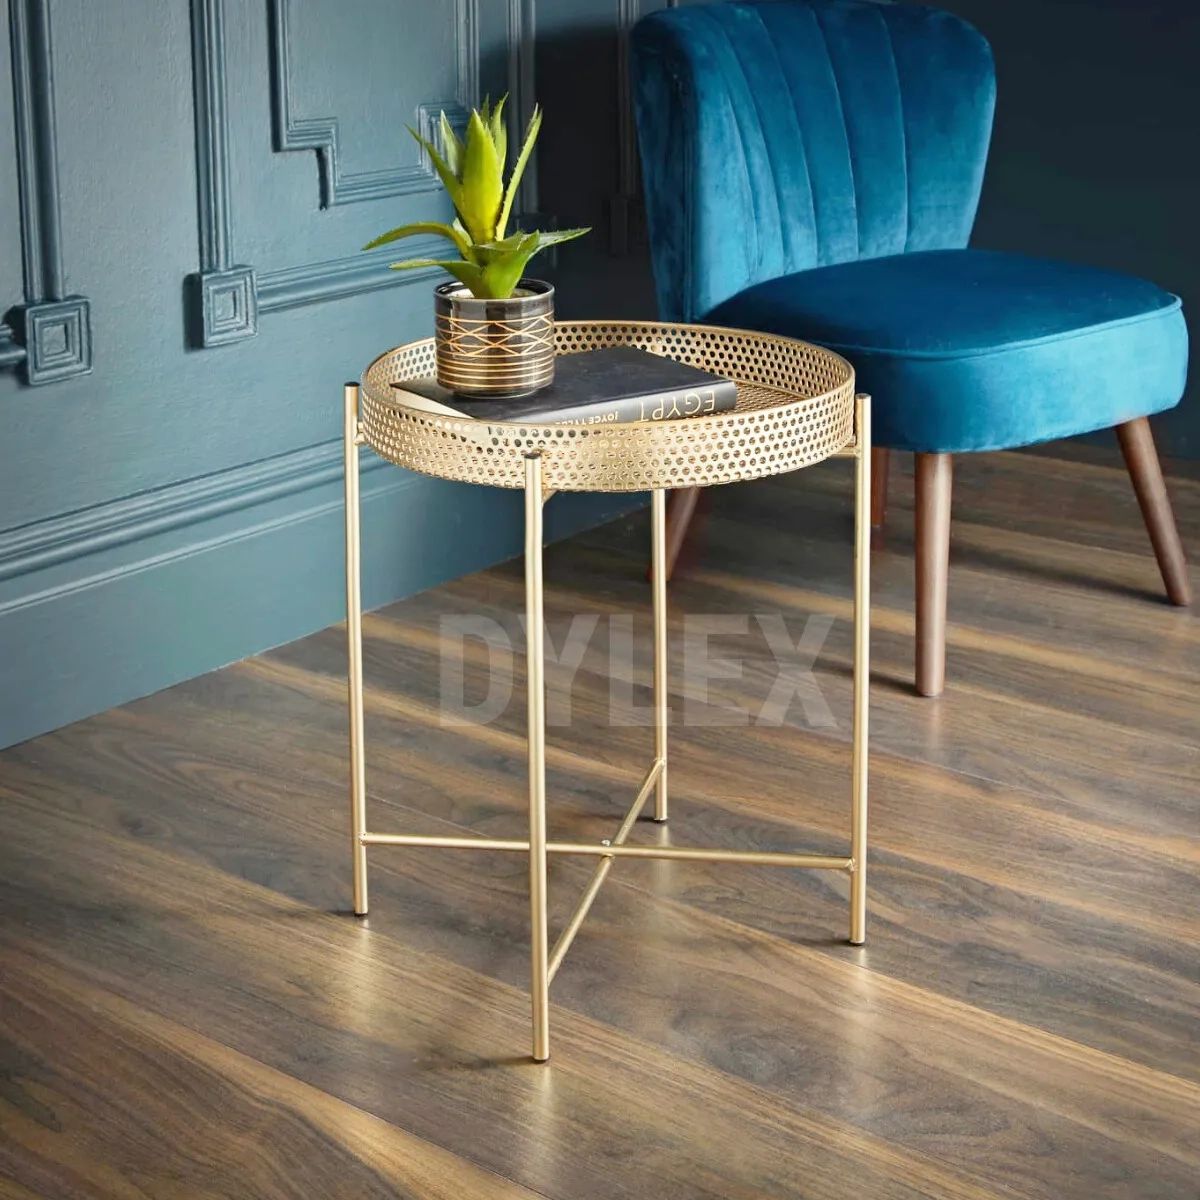 Tromso Gold Tray Metal Coffee Table With Removable Tray Top Max Loading:  10Kg | Ebay Pertaining To Detachable Tray Coffee Tables (Photo 1 of 15)